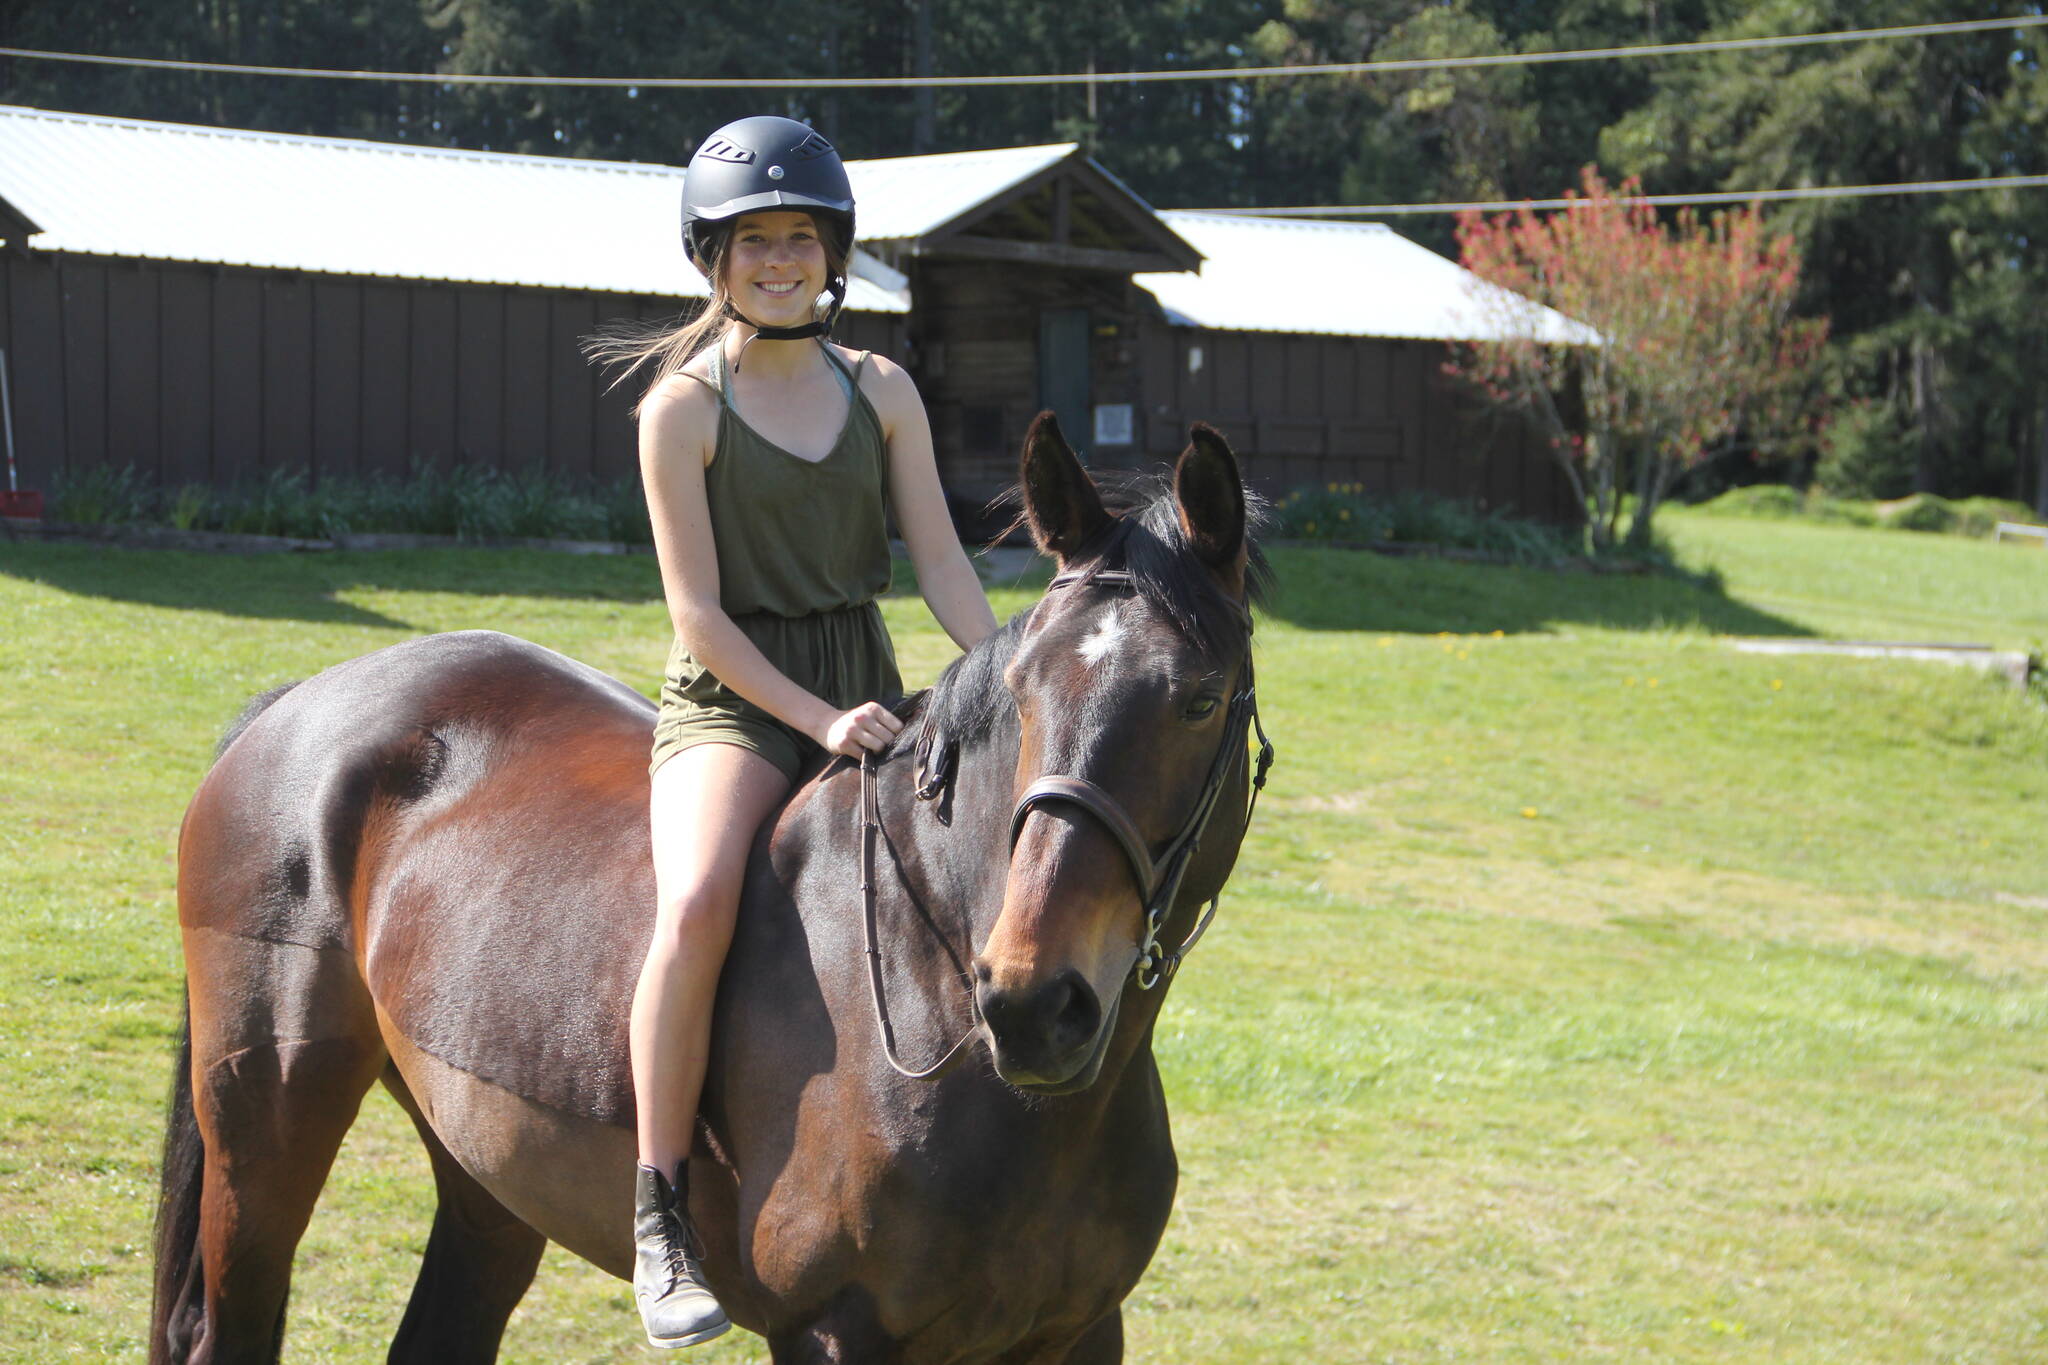 Maddy Racicot, pictured here with horse Serena, recently won the championship title for hunt seat equitation at the 2022 Interscholastic Equestrian Association Nationals Finals. (Photo provided)